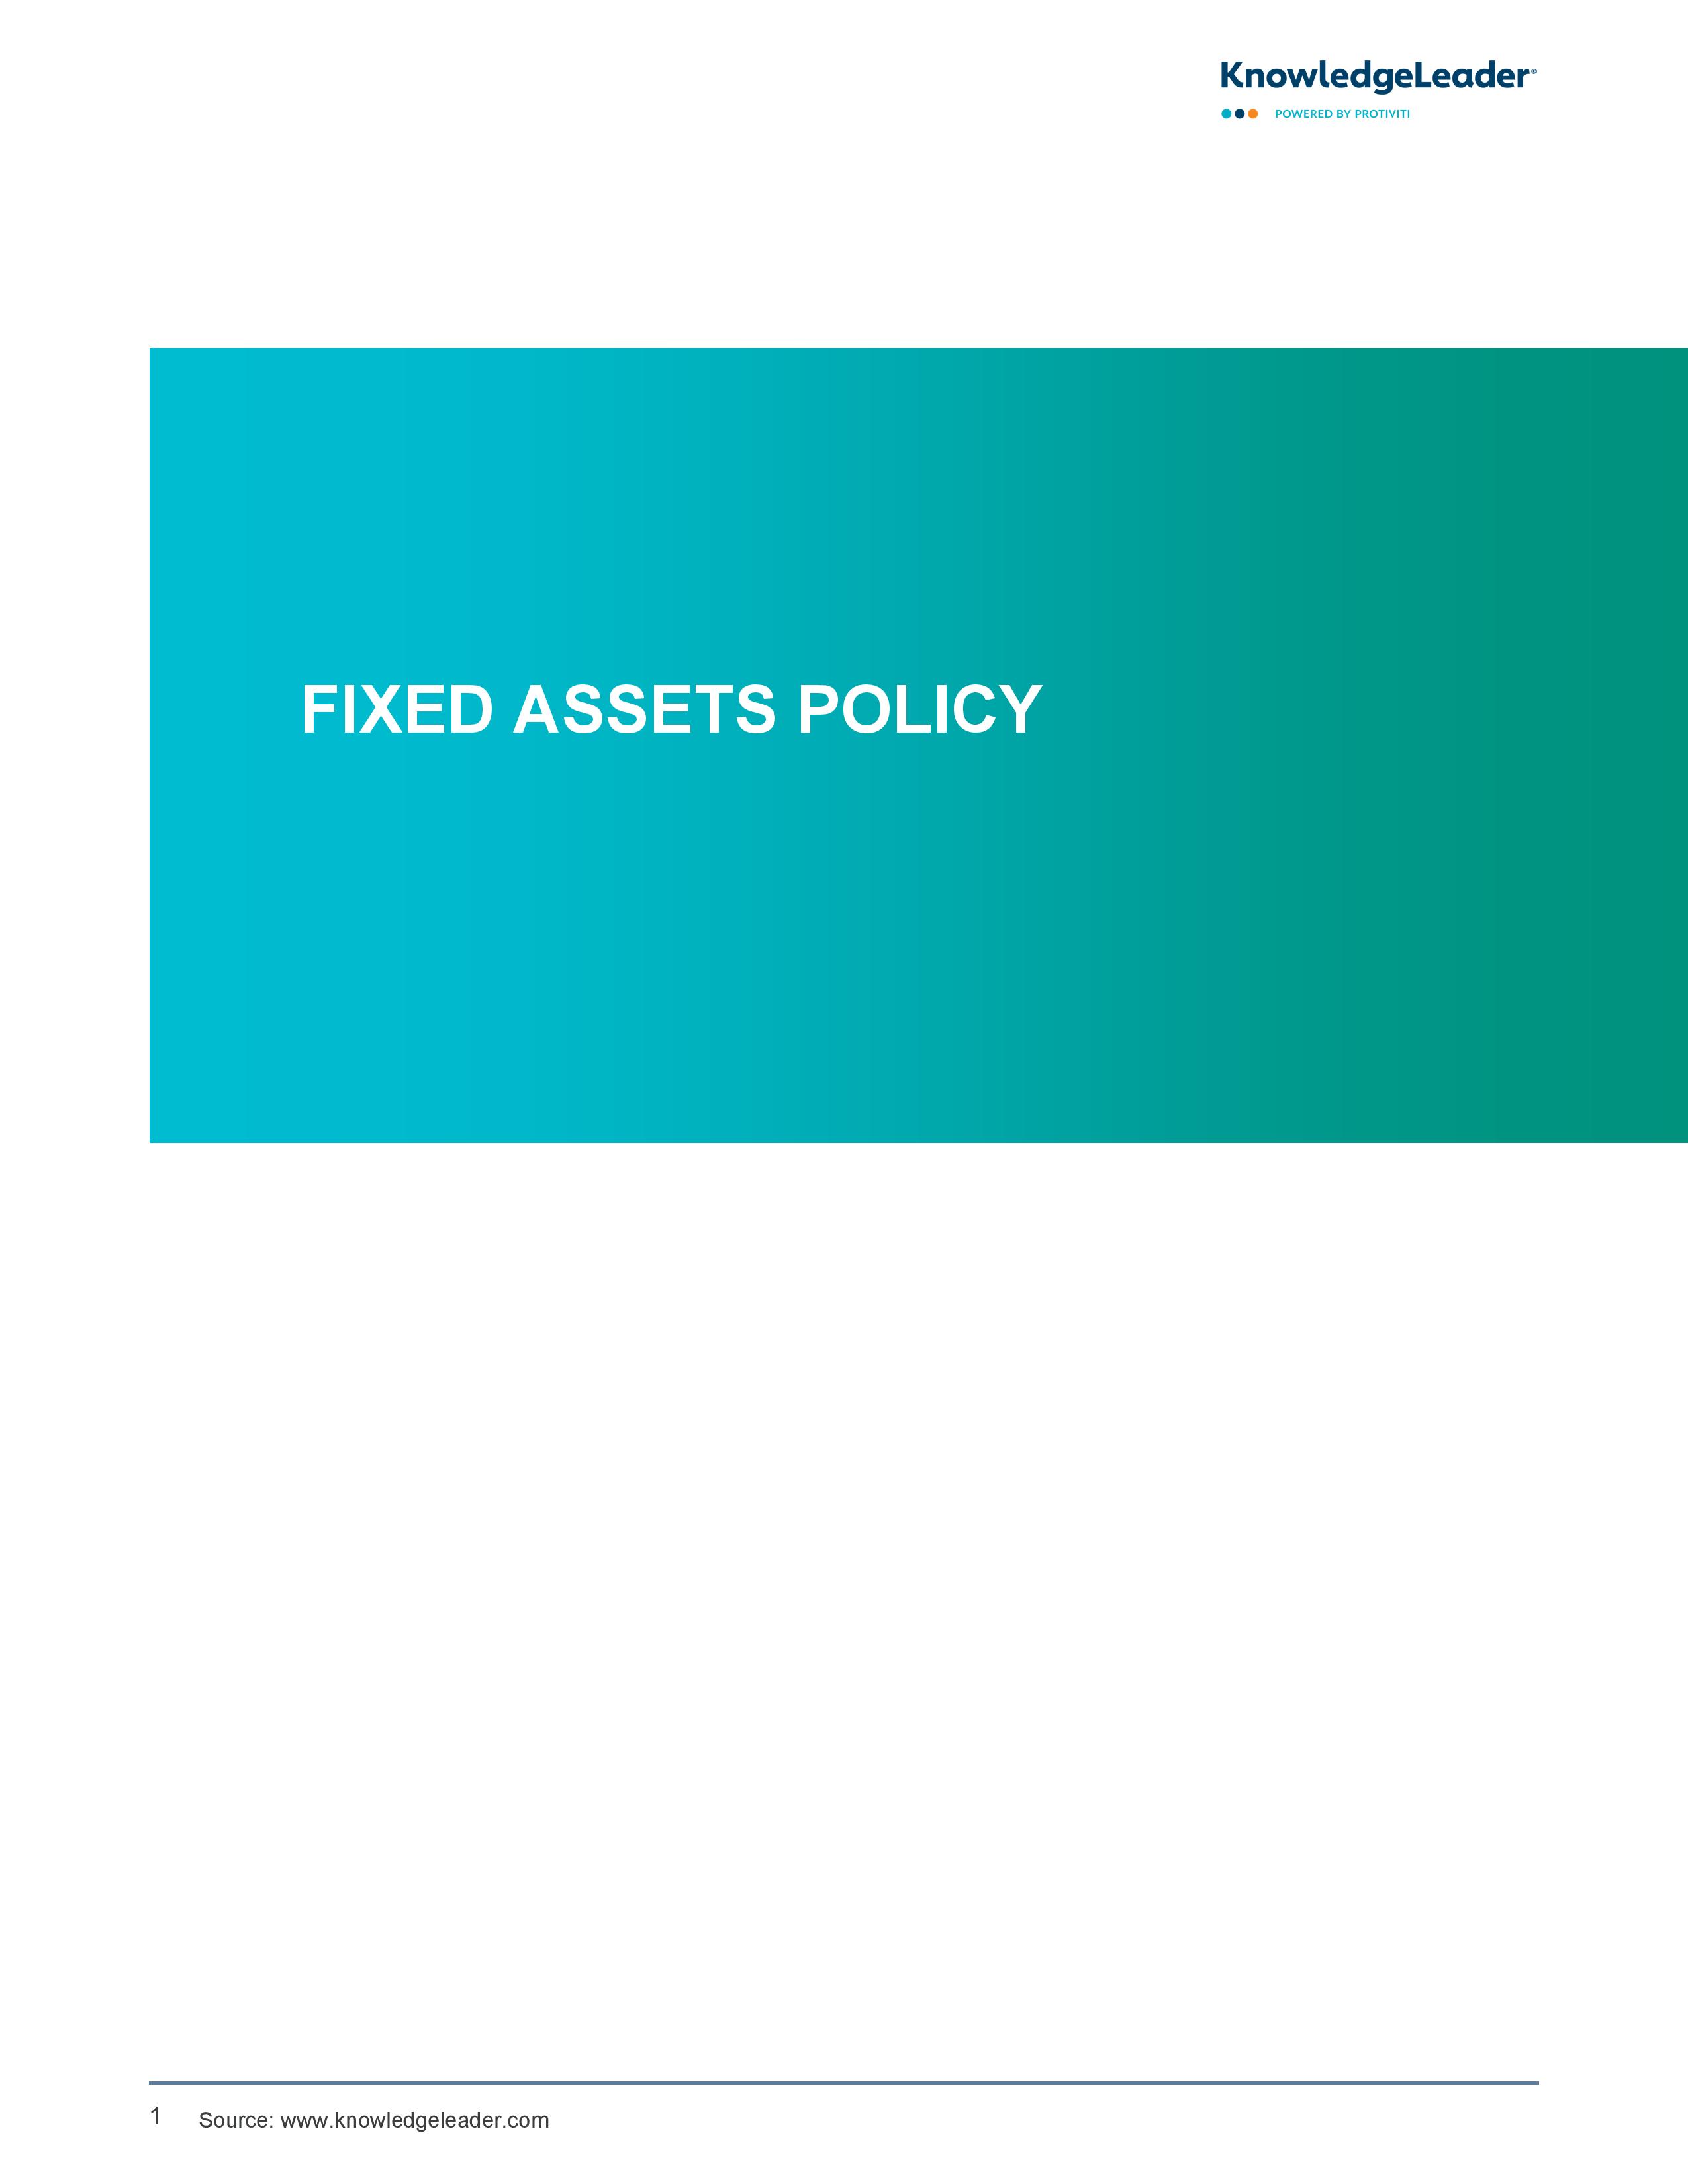 Screenshot of the first page of Fixed Assets Policy